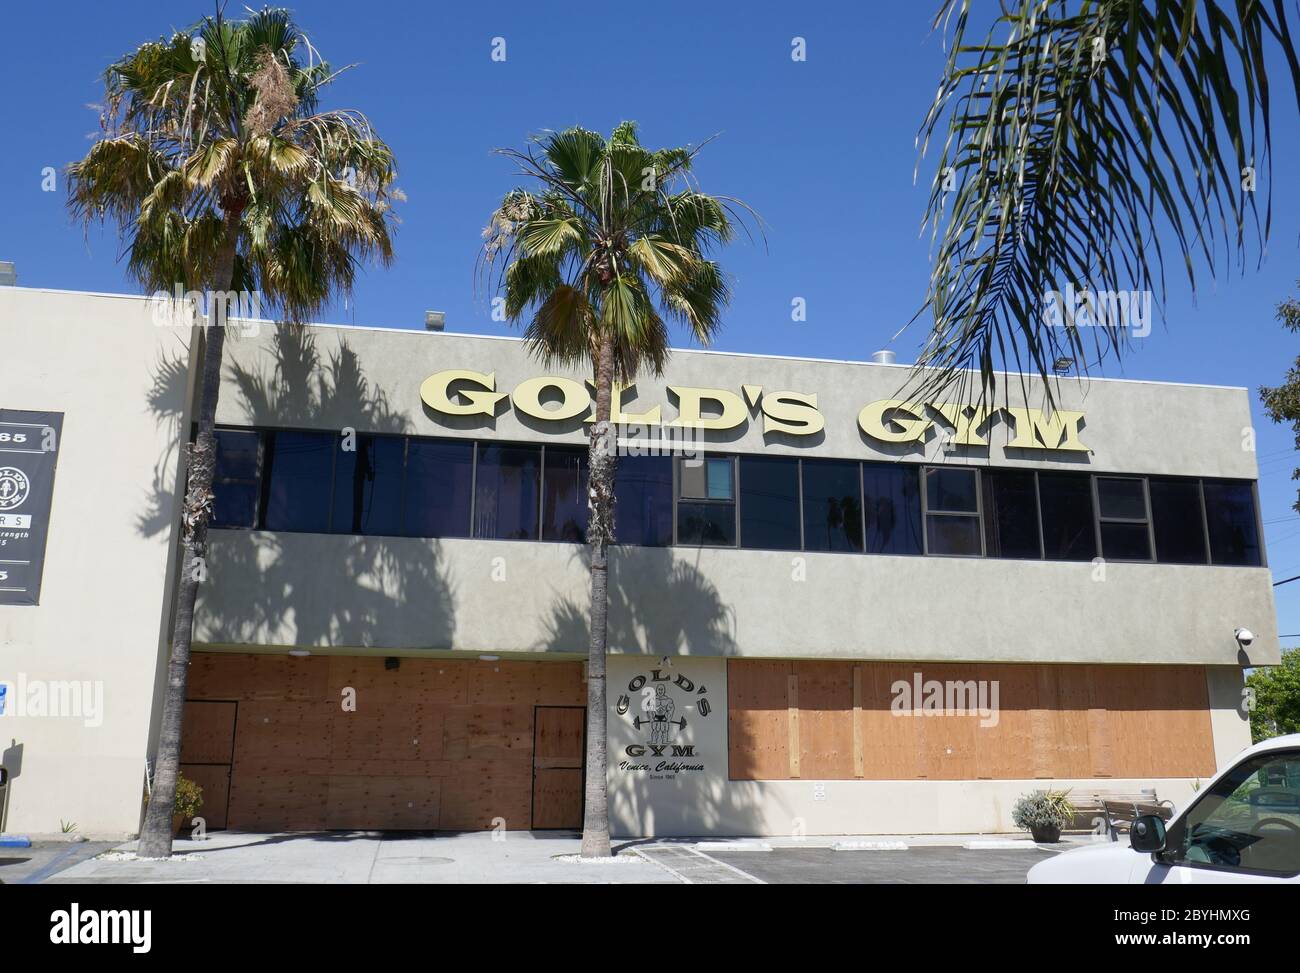 Venice, California, USA 9th June 2020 A general view of atmosphere of closed Boarded Golds Gym at Venice Beach on June 9, 2020 in Venice, California, USA. Photo by Barry King/Alamy Stock Photo Stock Photo